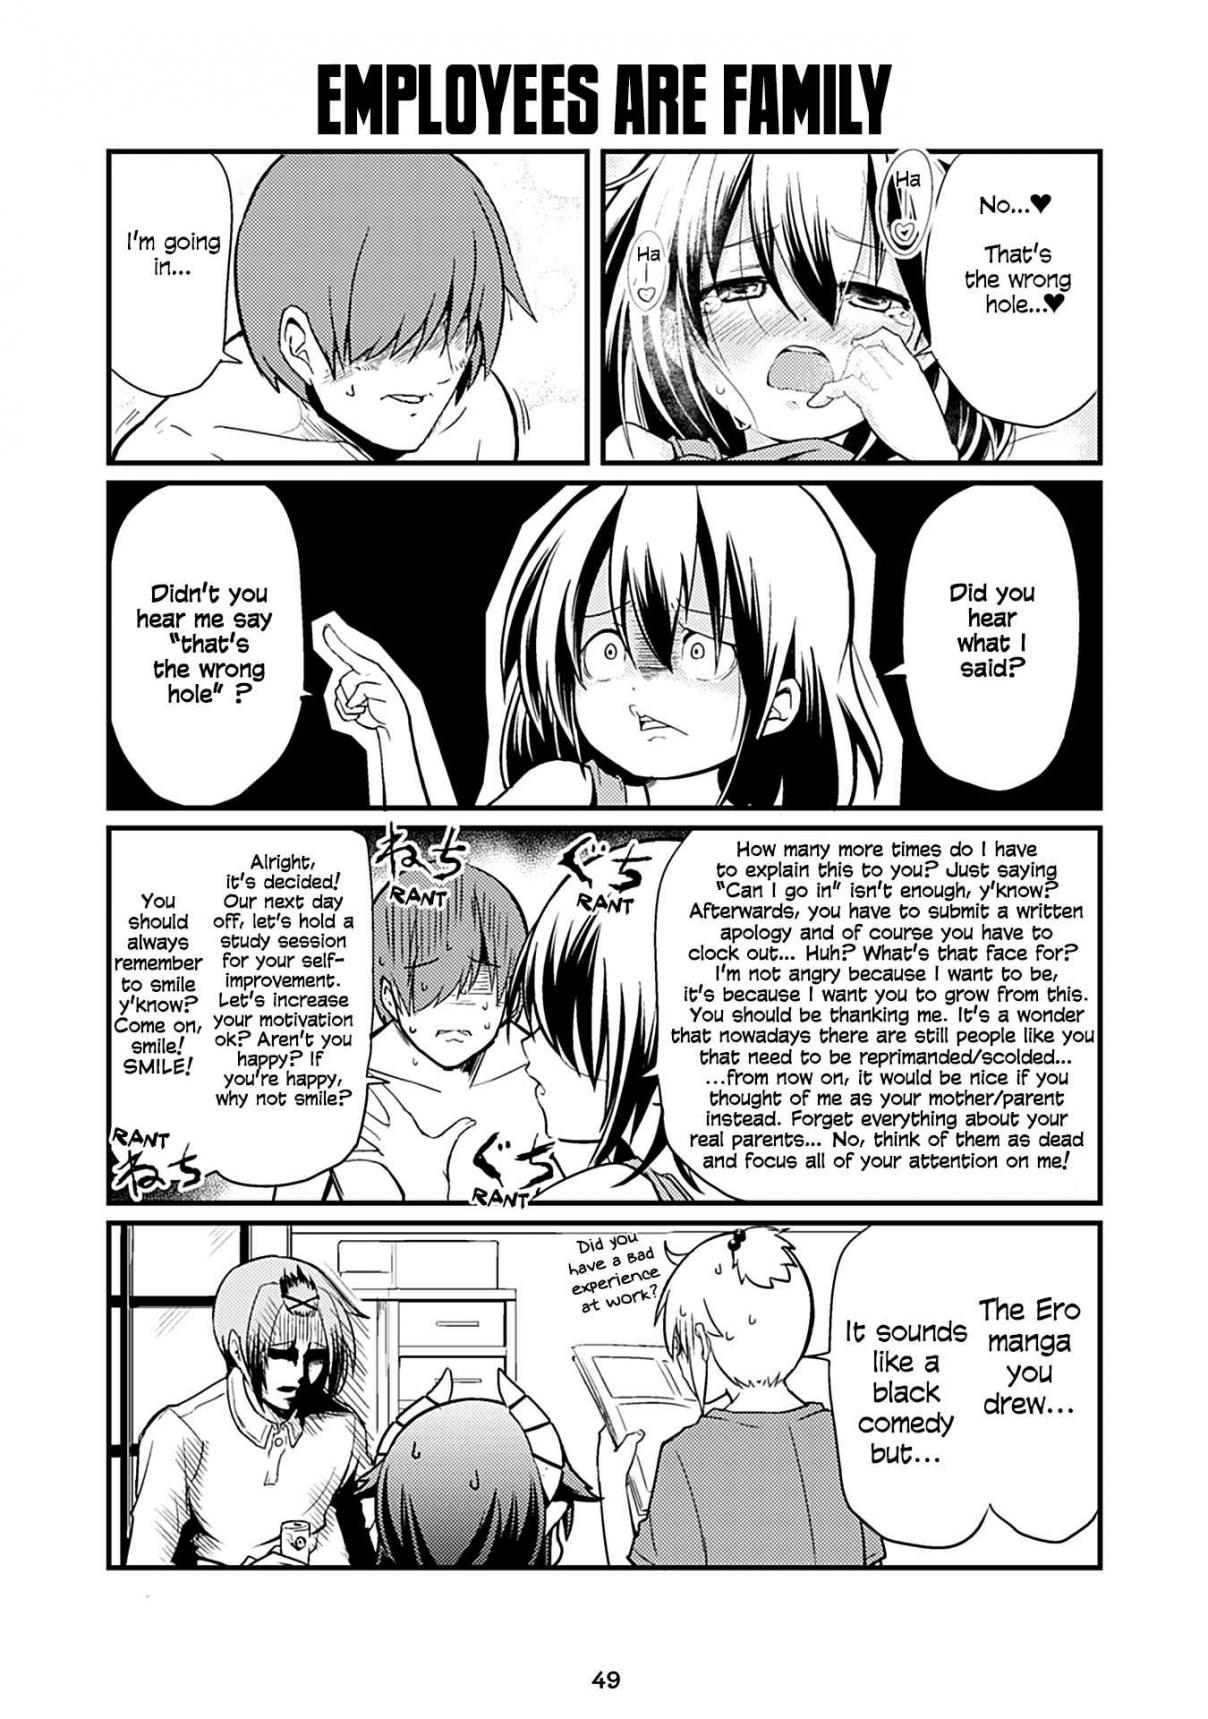 Naughty Succubus "Saki chan" Vol. 1 Ch. 43 Employees are family